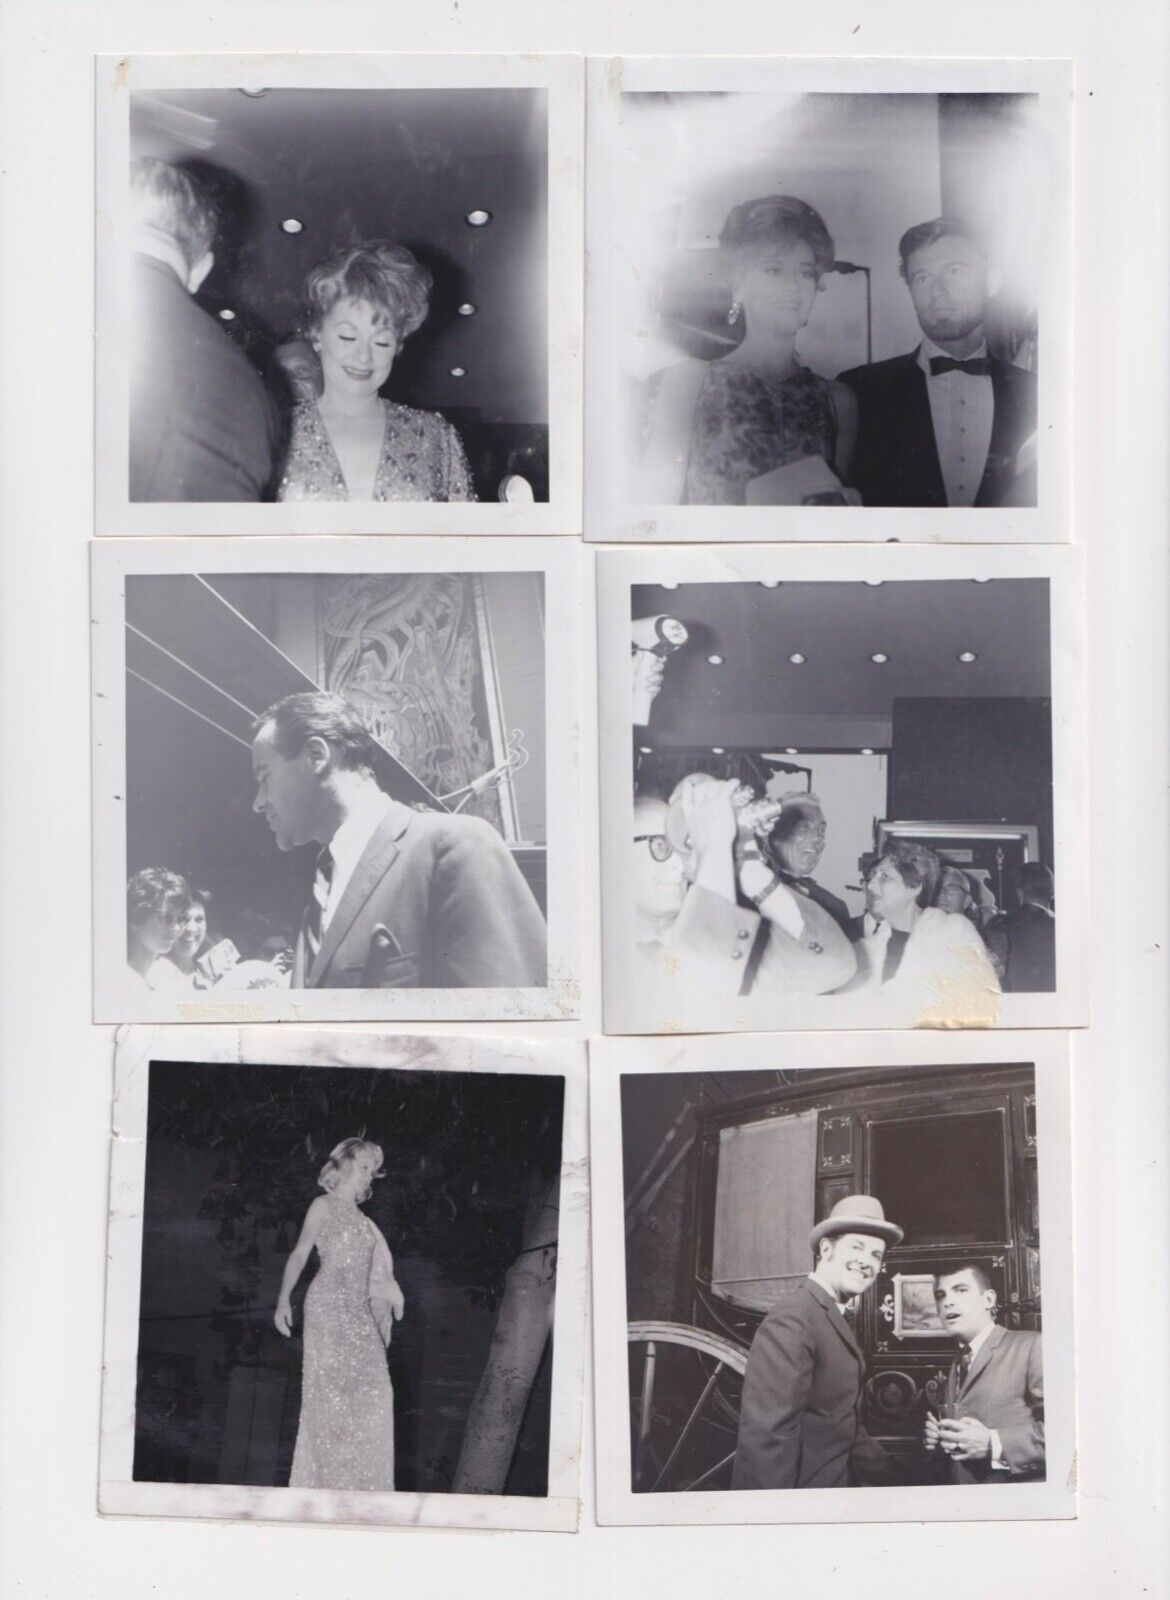 58 VTG. HOLLYWOOD CELEBRITY PHOTOS SALVAGED FROM PHOTO REP SCRAPBOOK.  1963-65.